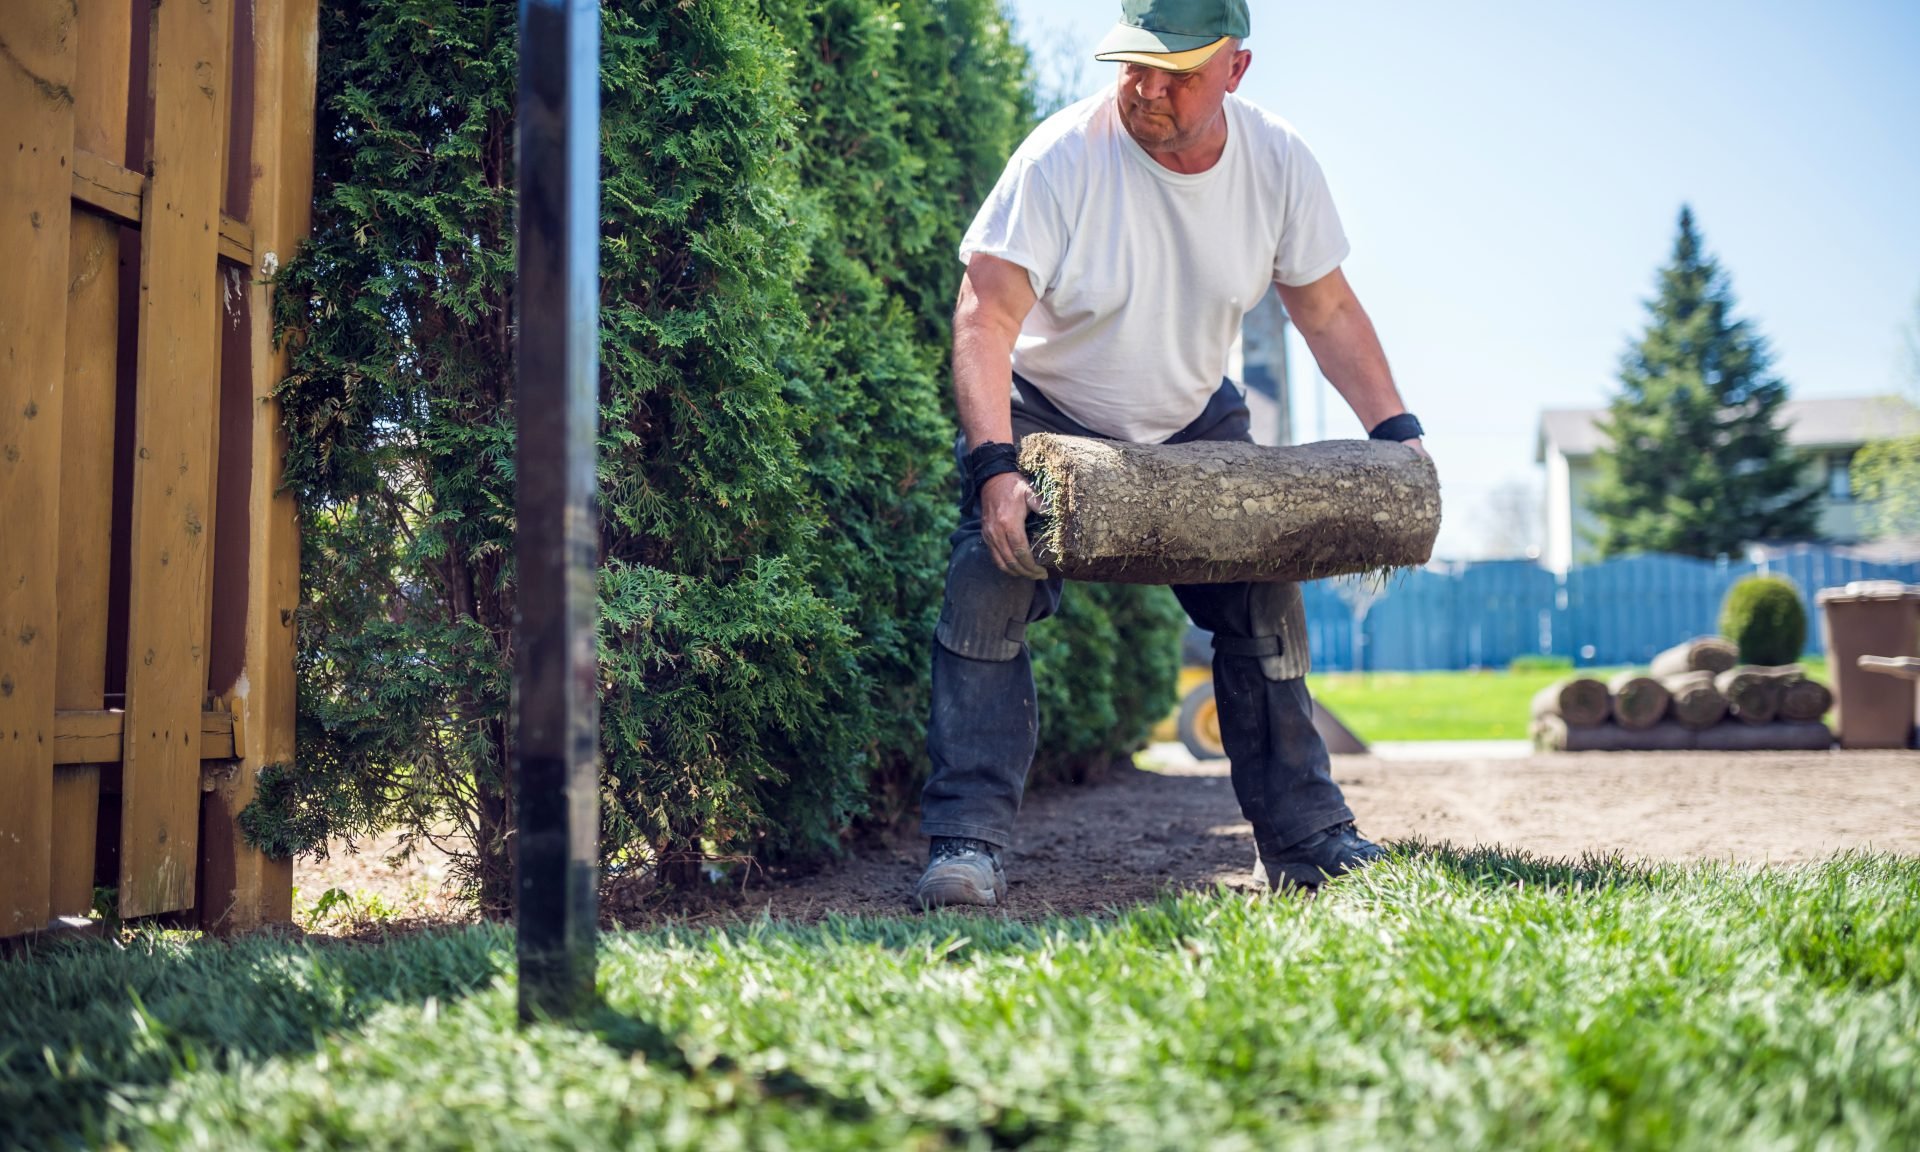 A Landscaping Or Lawn Care Business, Landscaping Business Insurance Cost